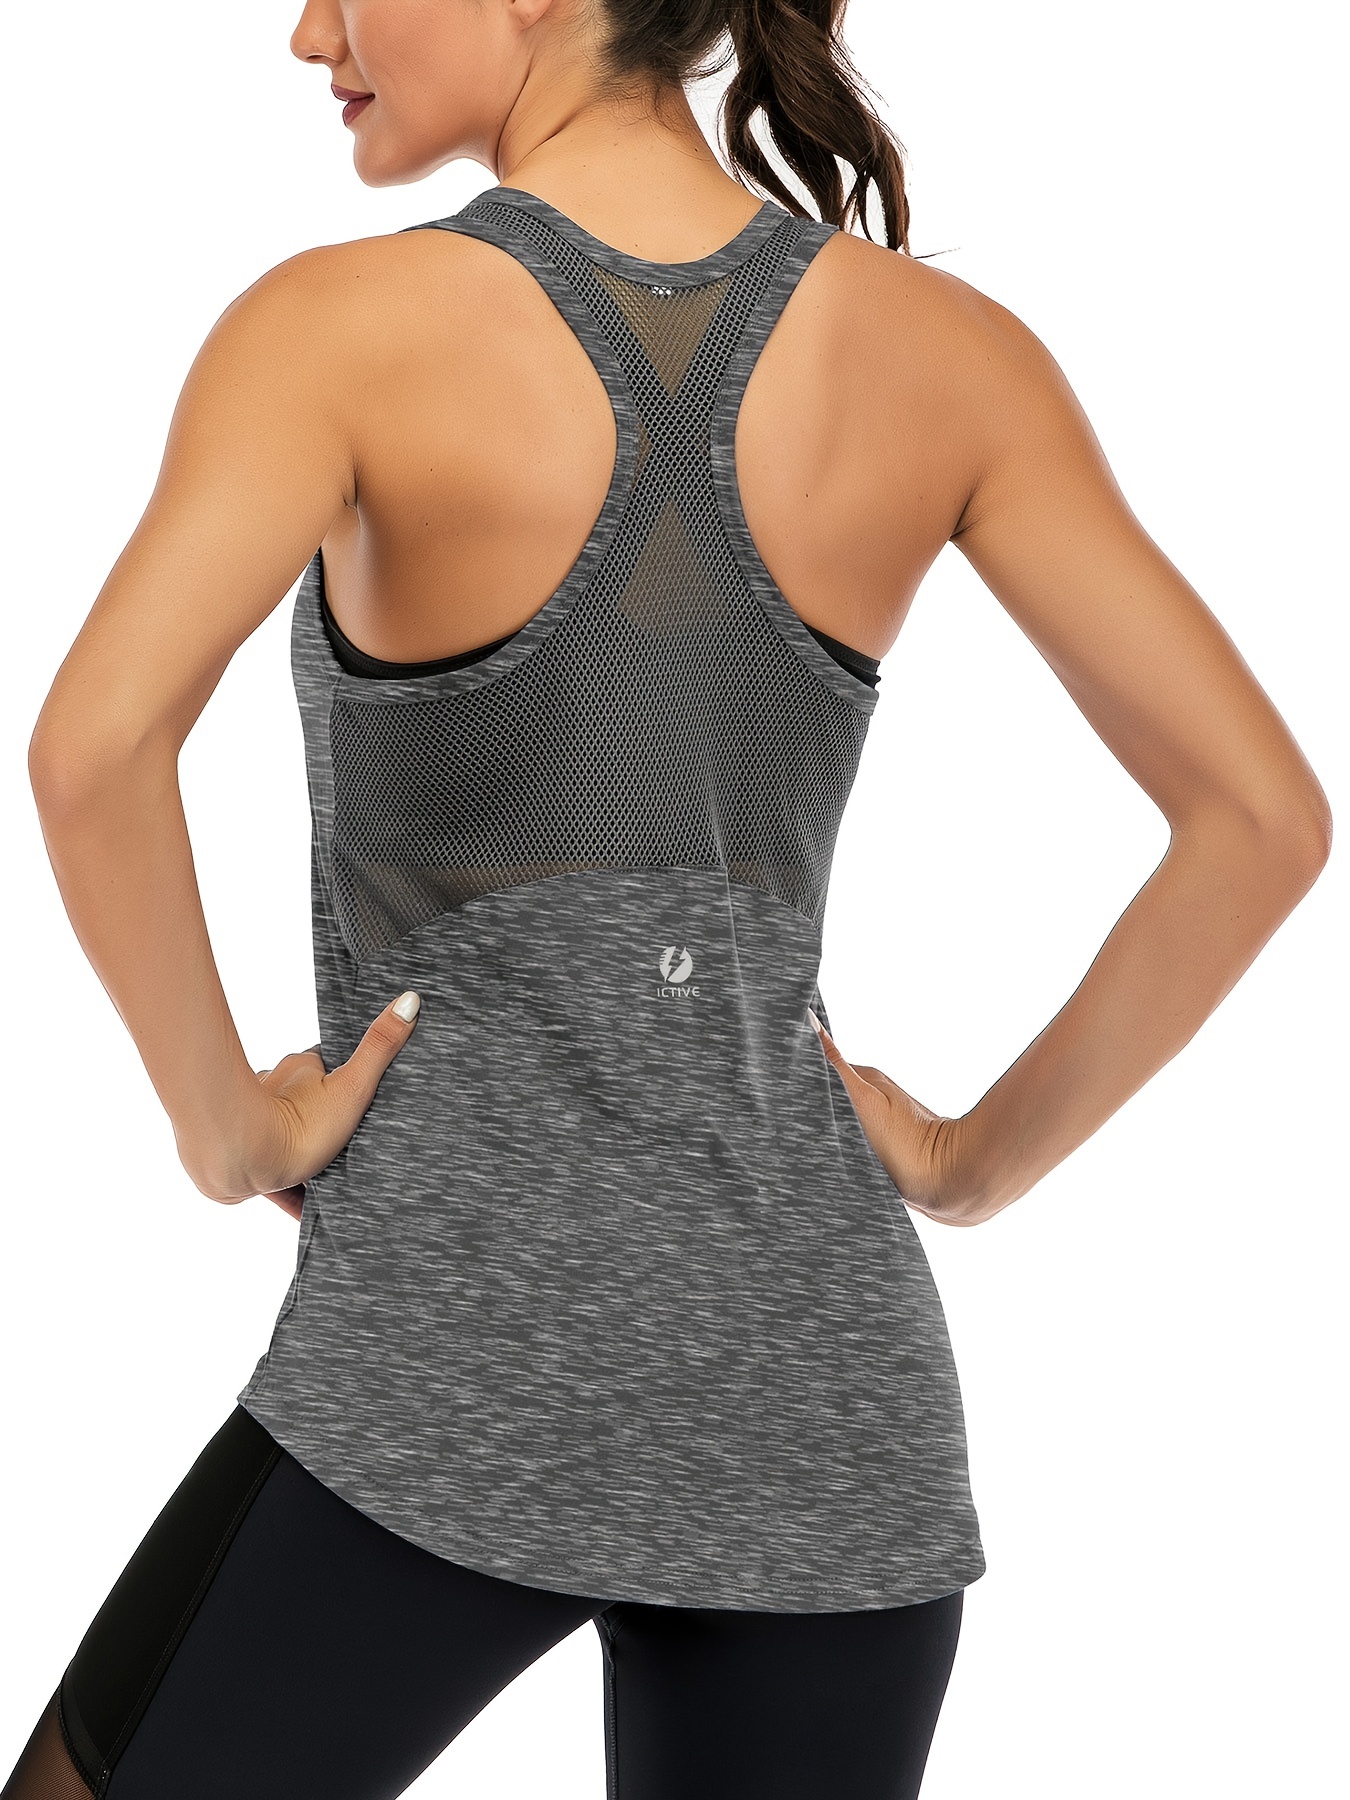 TapOut Womens Athletic Shirt M Medium Gray Mesh Work out Yoga Sport